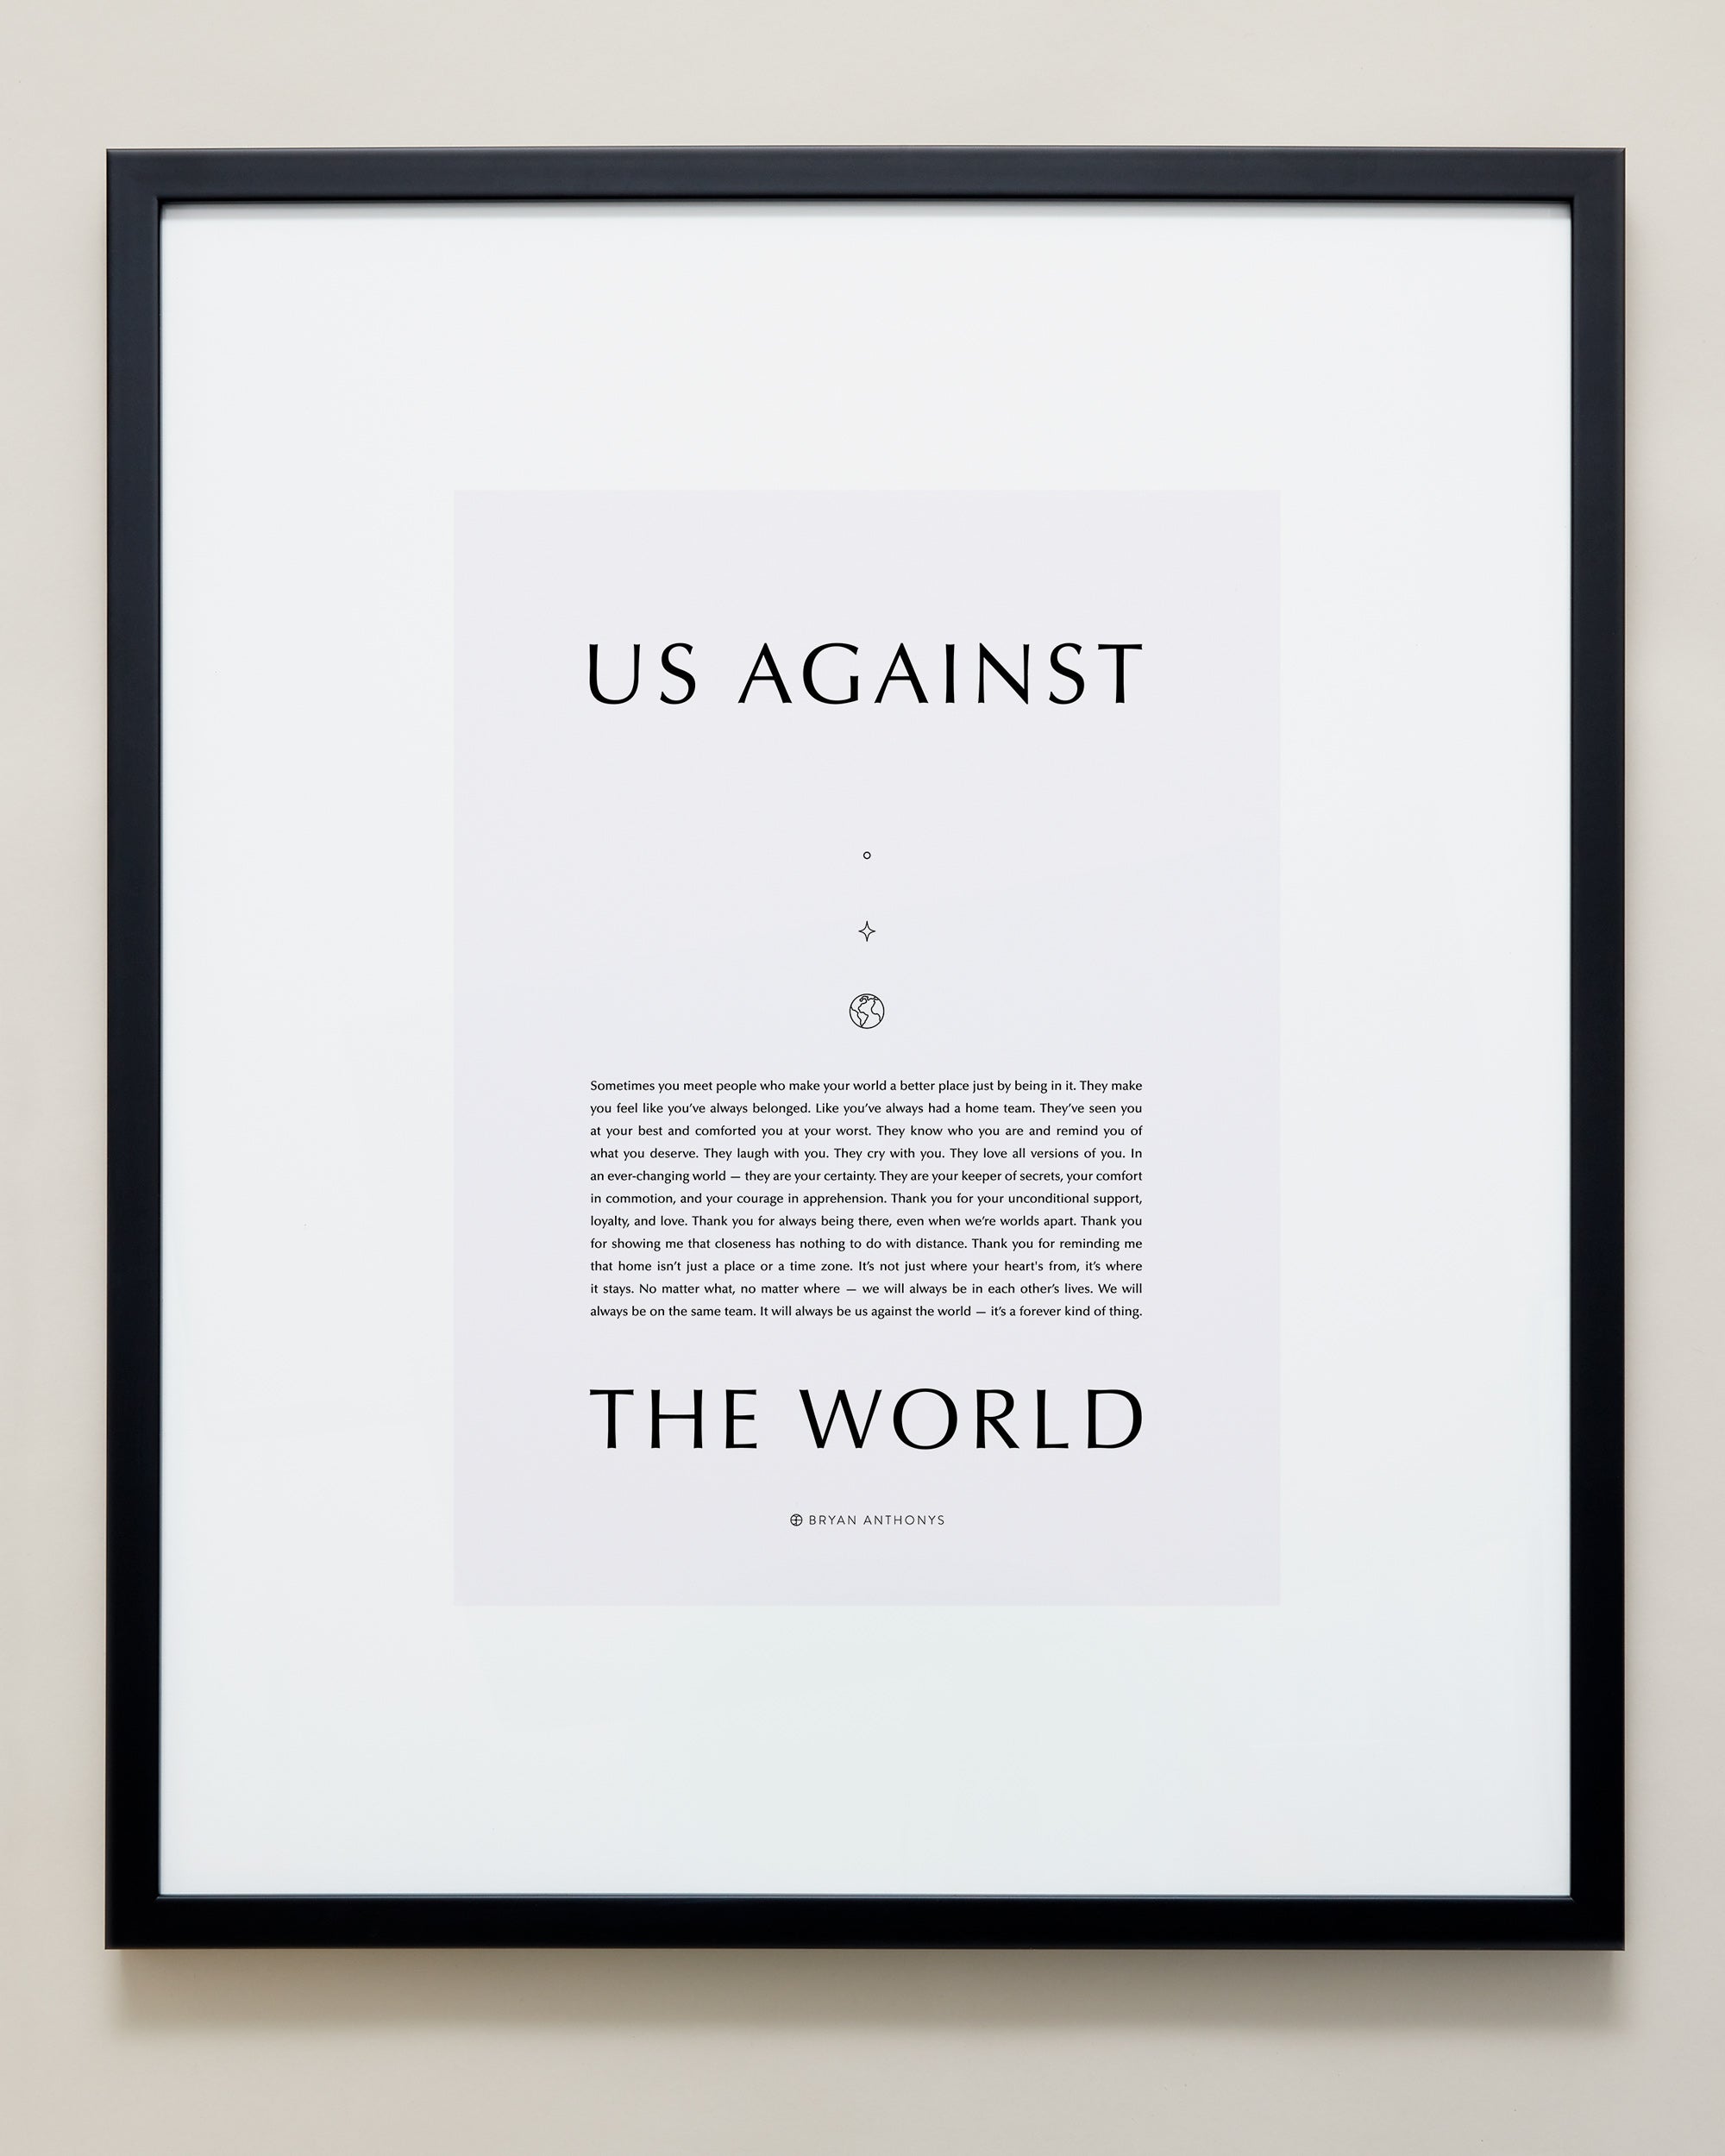 Bryan Anthonys Home Decor Purposeful Prints Us Against The World Iconic Framed Print Gray Art With Black Frame 20x24